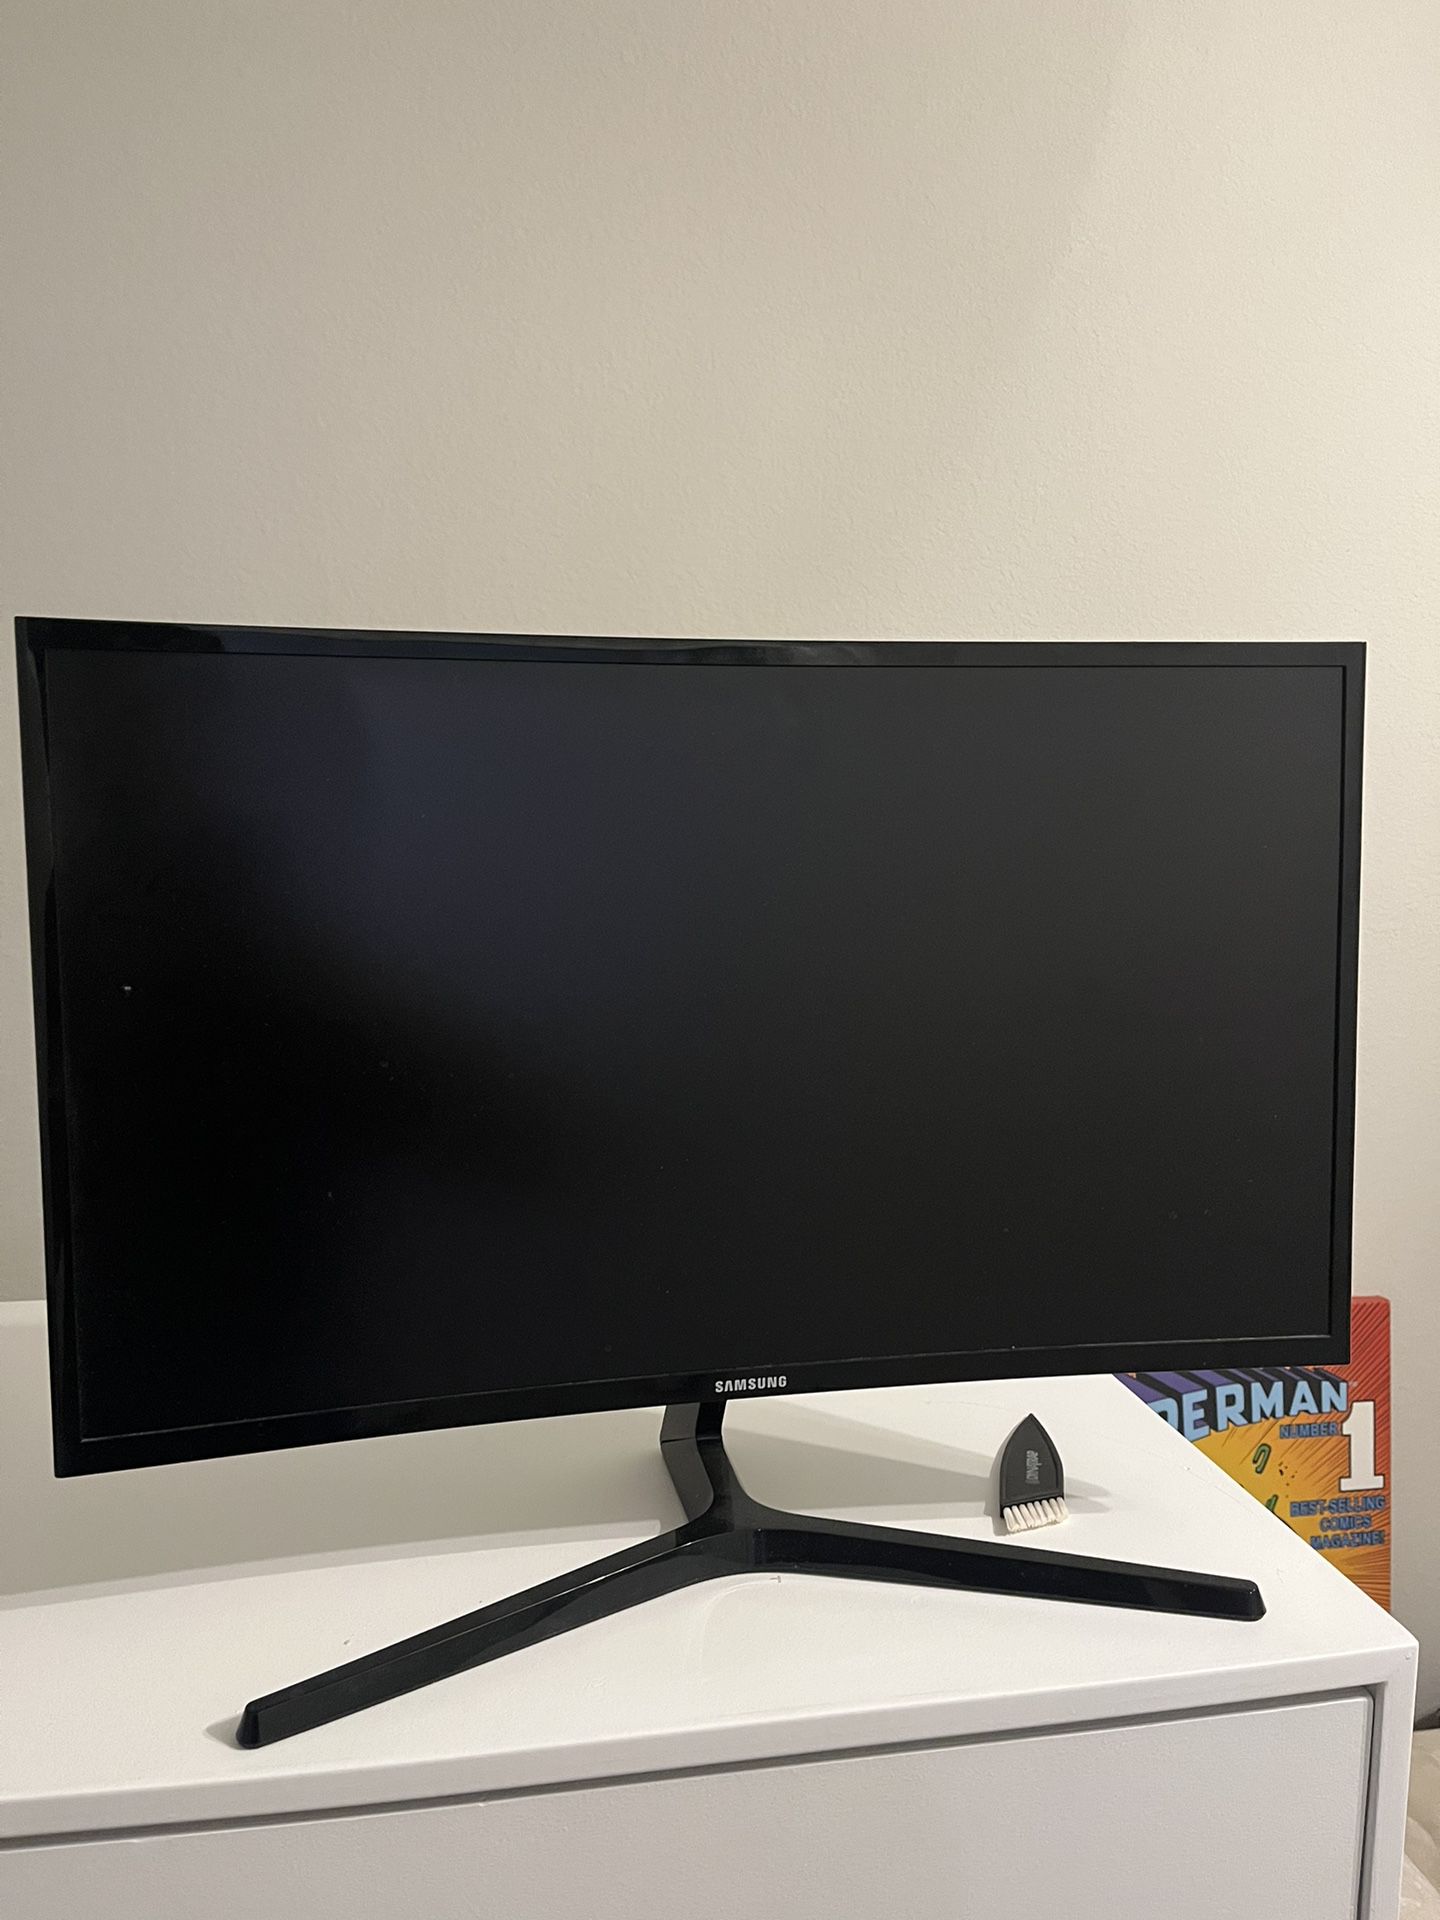 Samsung Curved 27in Monitor 